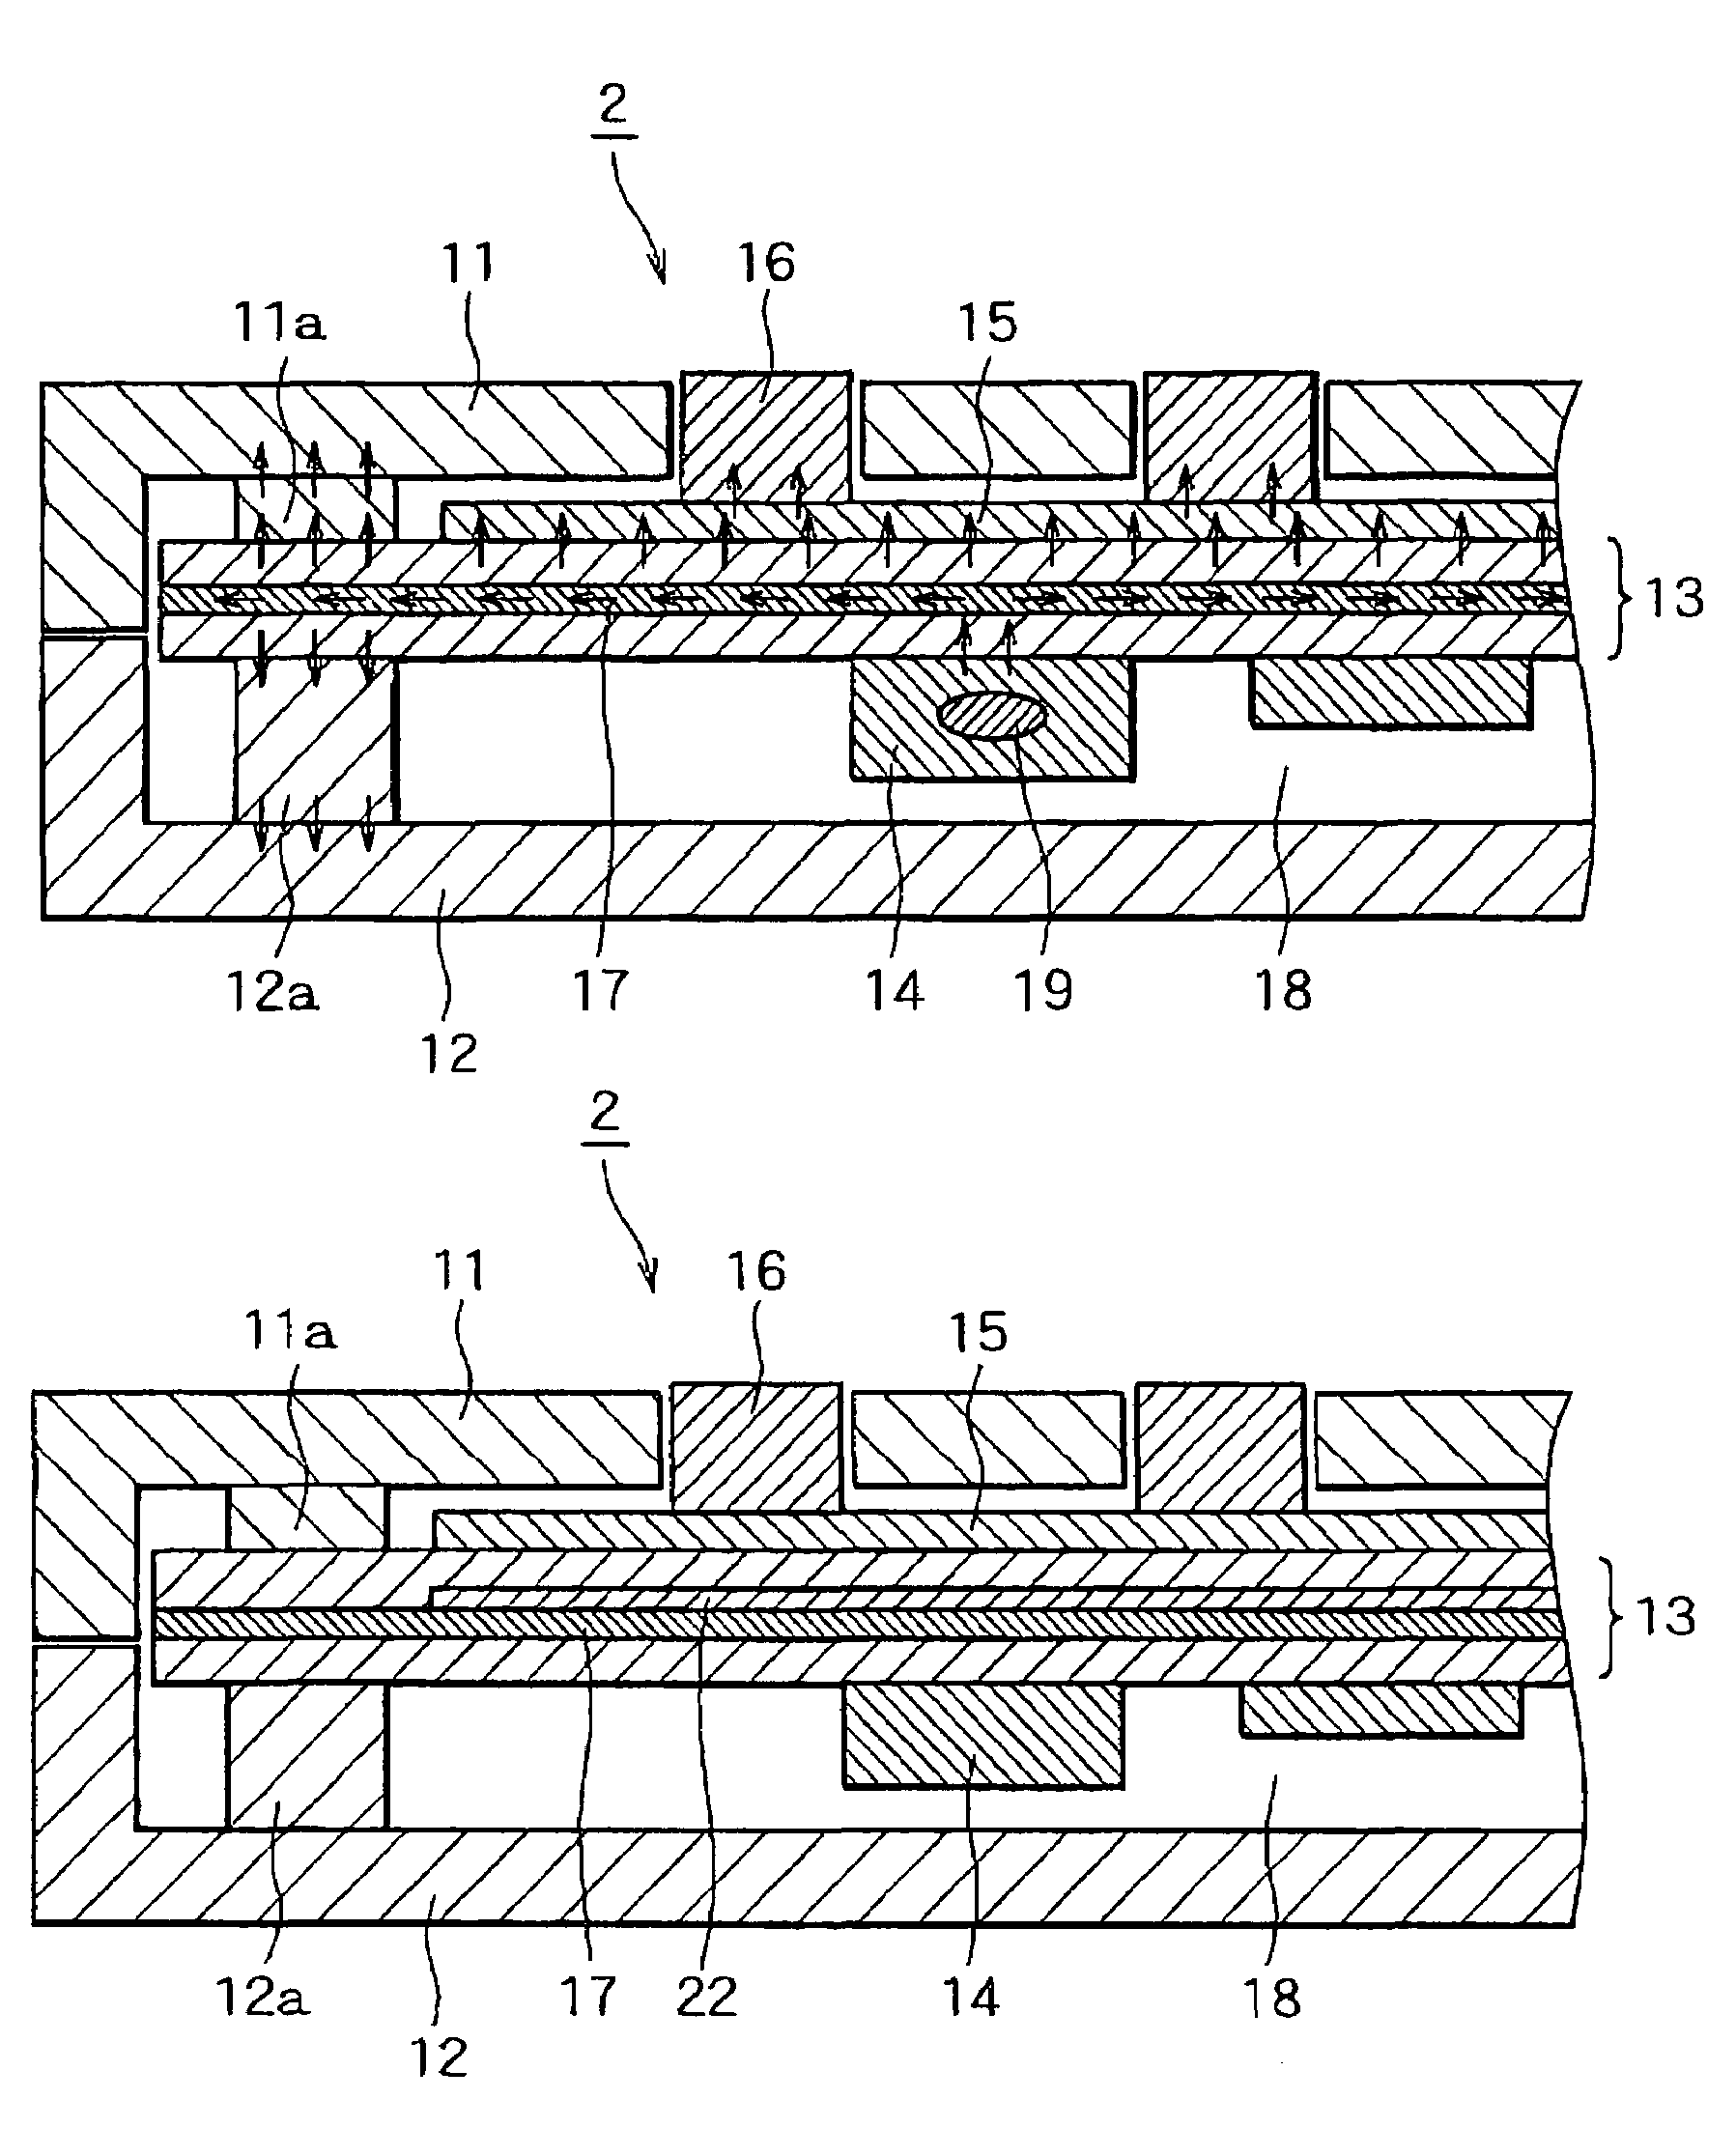 Mobile terminal device and method for radiating heat therefrom